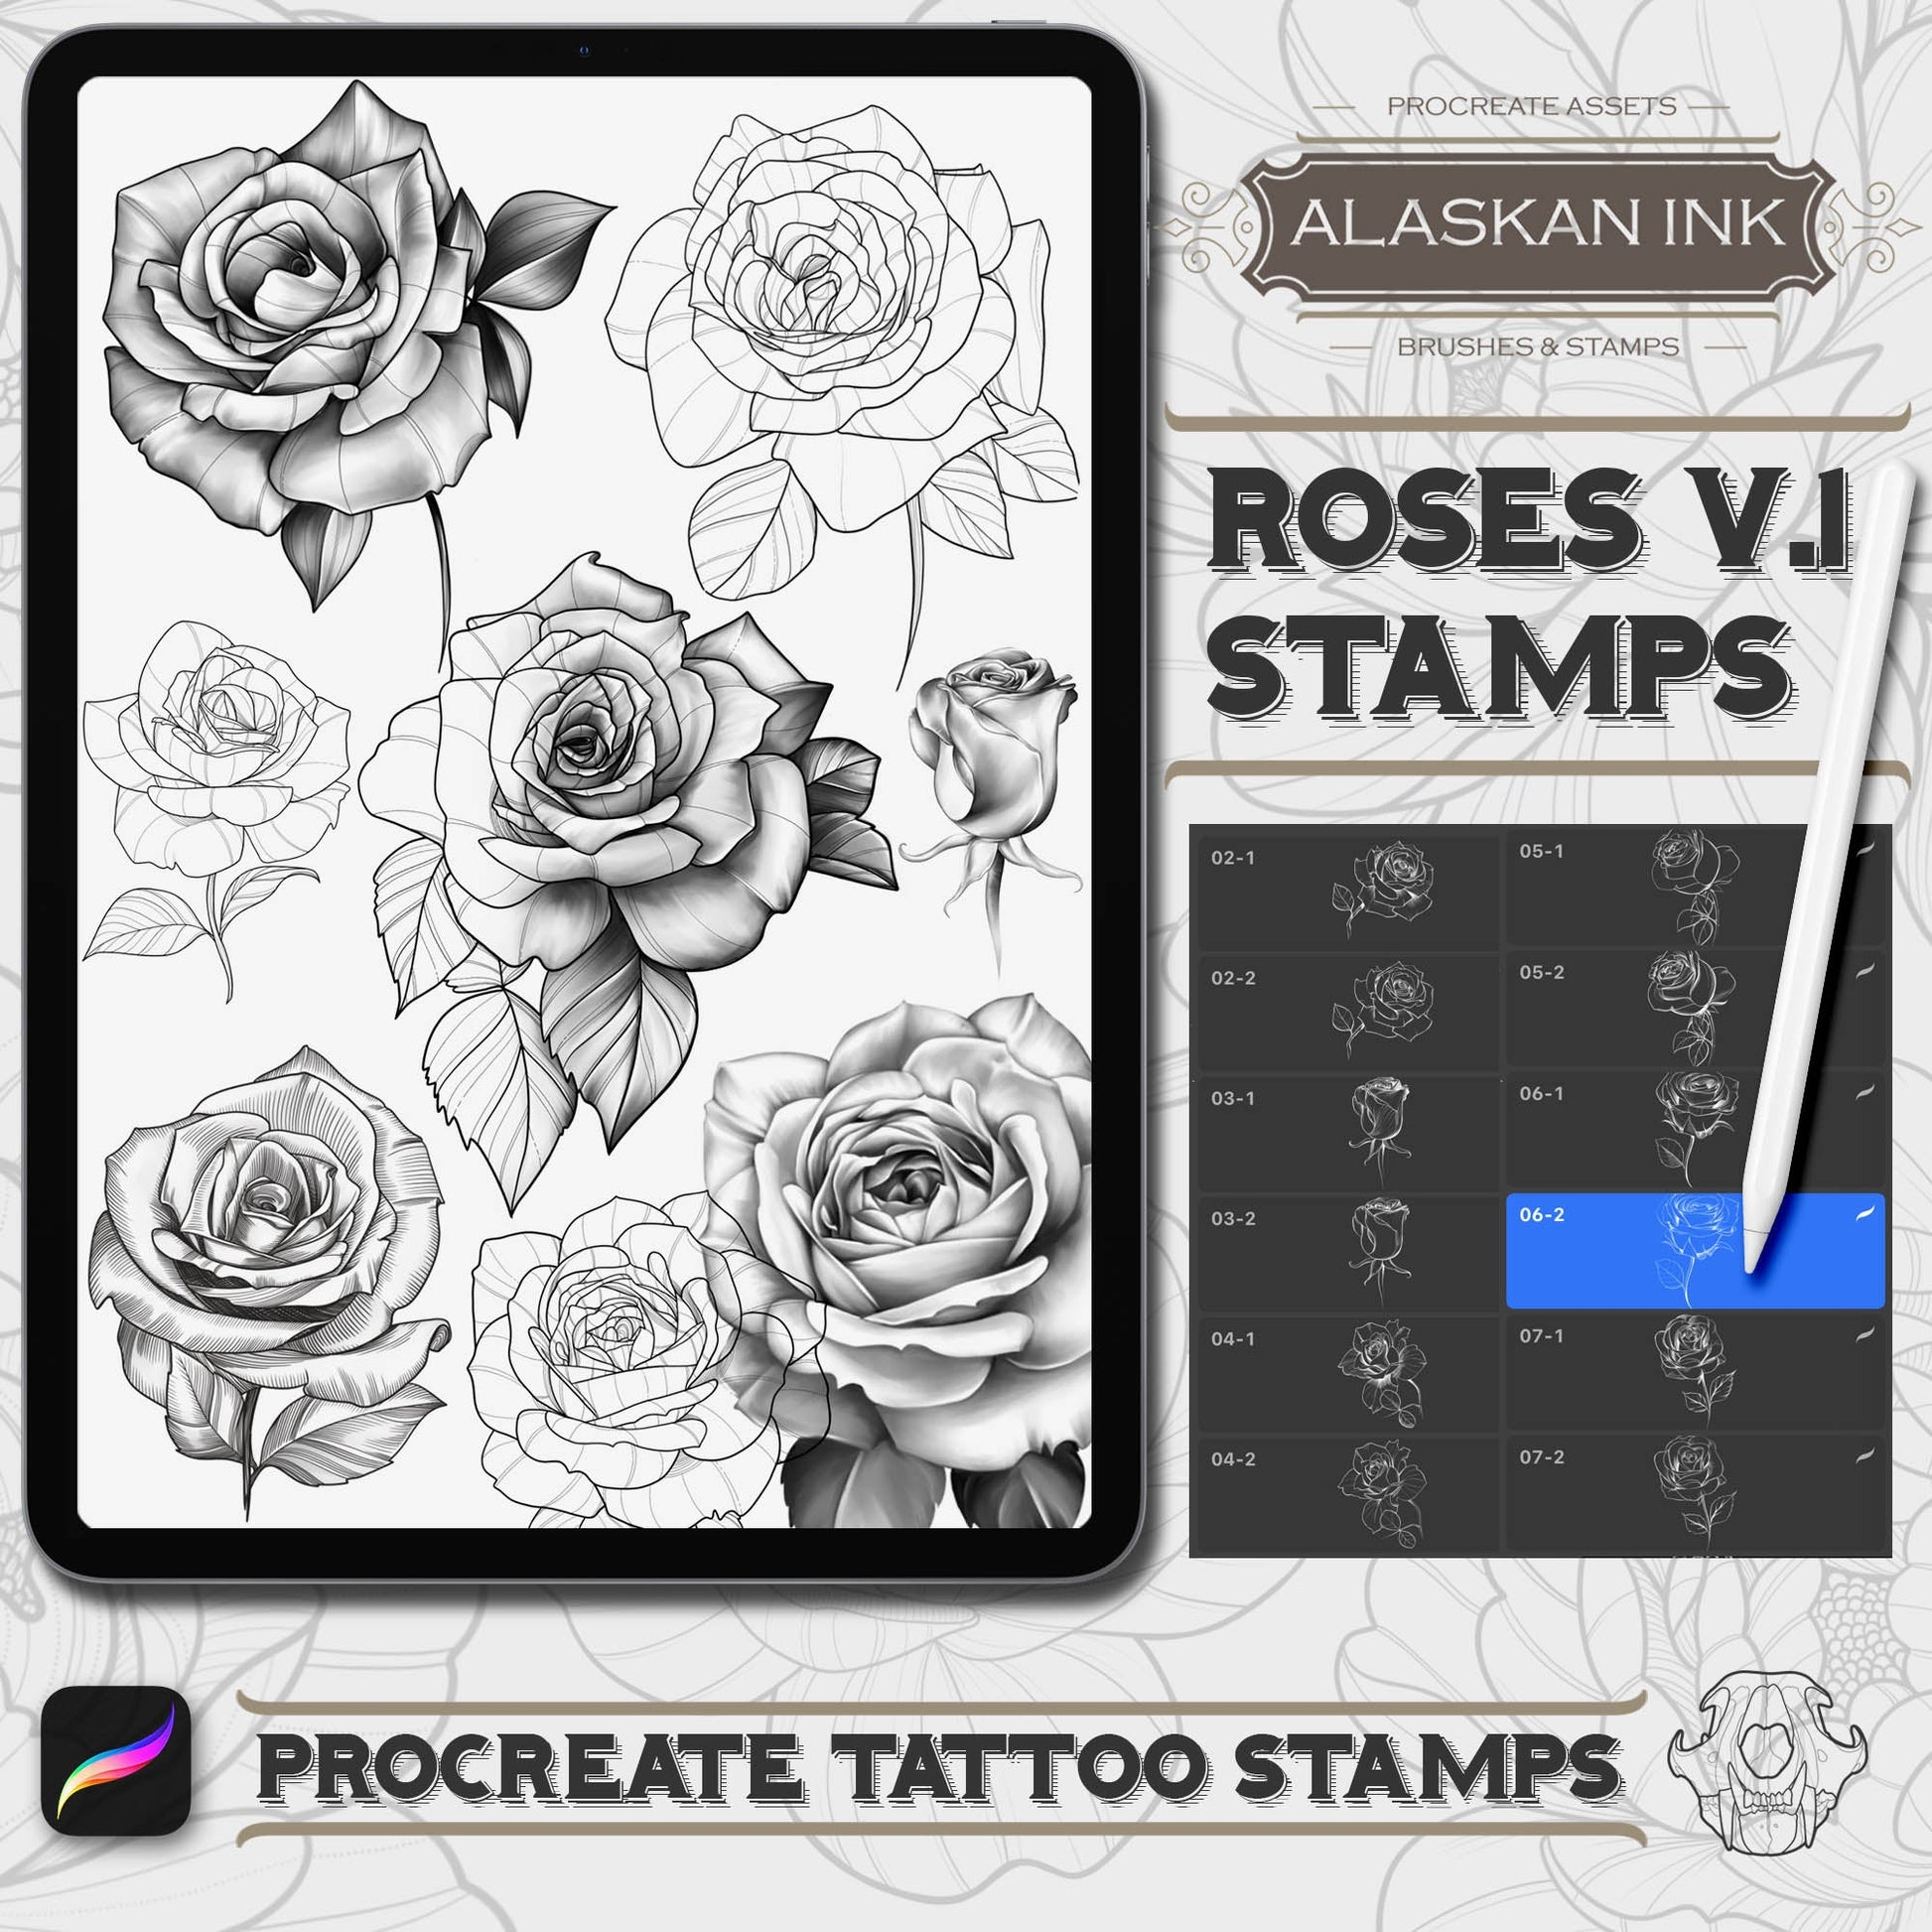 13 Tattoo Procreate BrushSets in the Ultima Pack for iPad and iPad pro